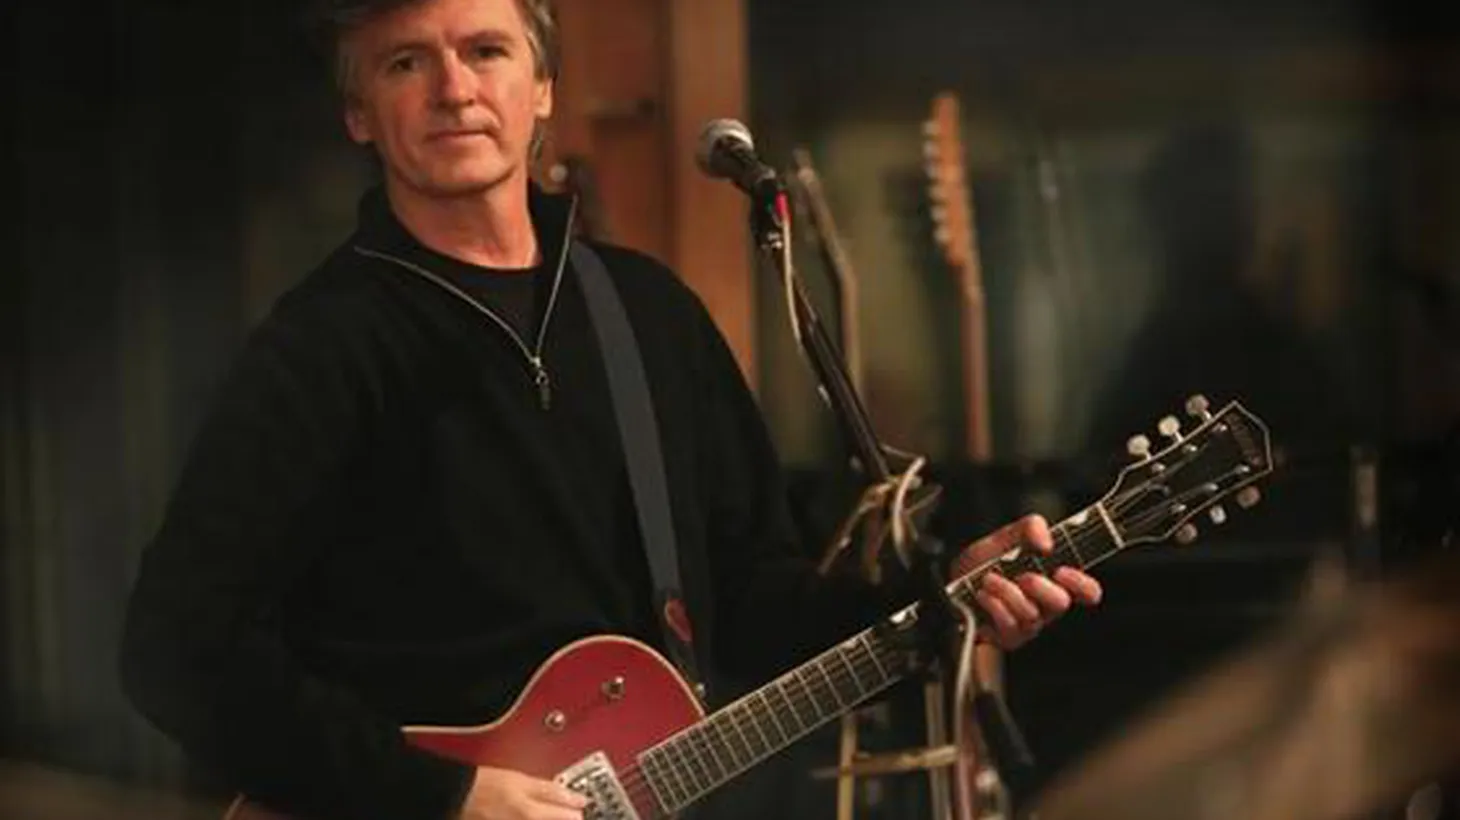 Crowded House founder Neil Finn gathered a stellar line-up for his latest project 7 World Collide and issued it to raise funds for Oxfam. He’ll feature Lisa Germano and son Liam when they perform for Morning Becomes Eclectic listeners at 11:15am.